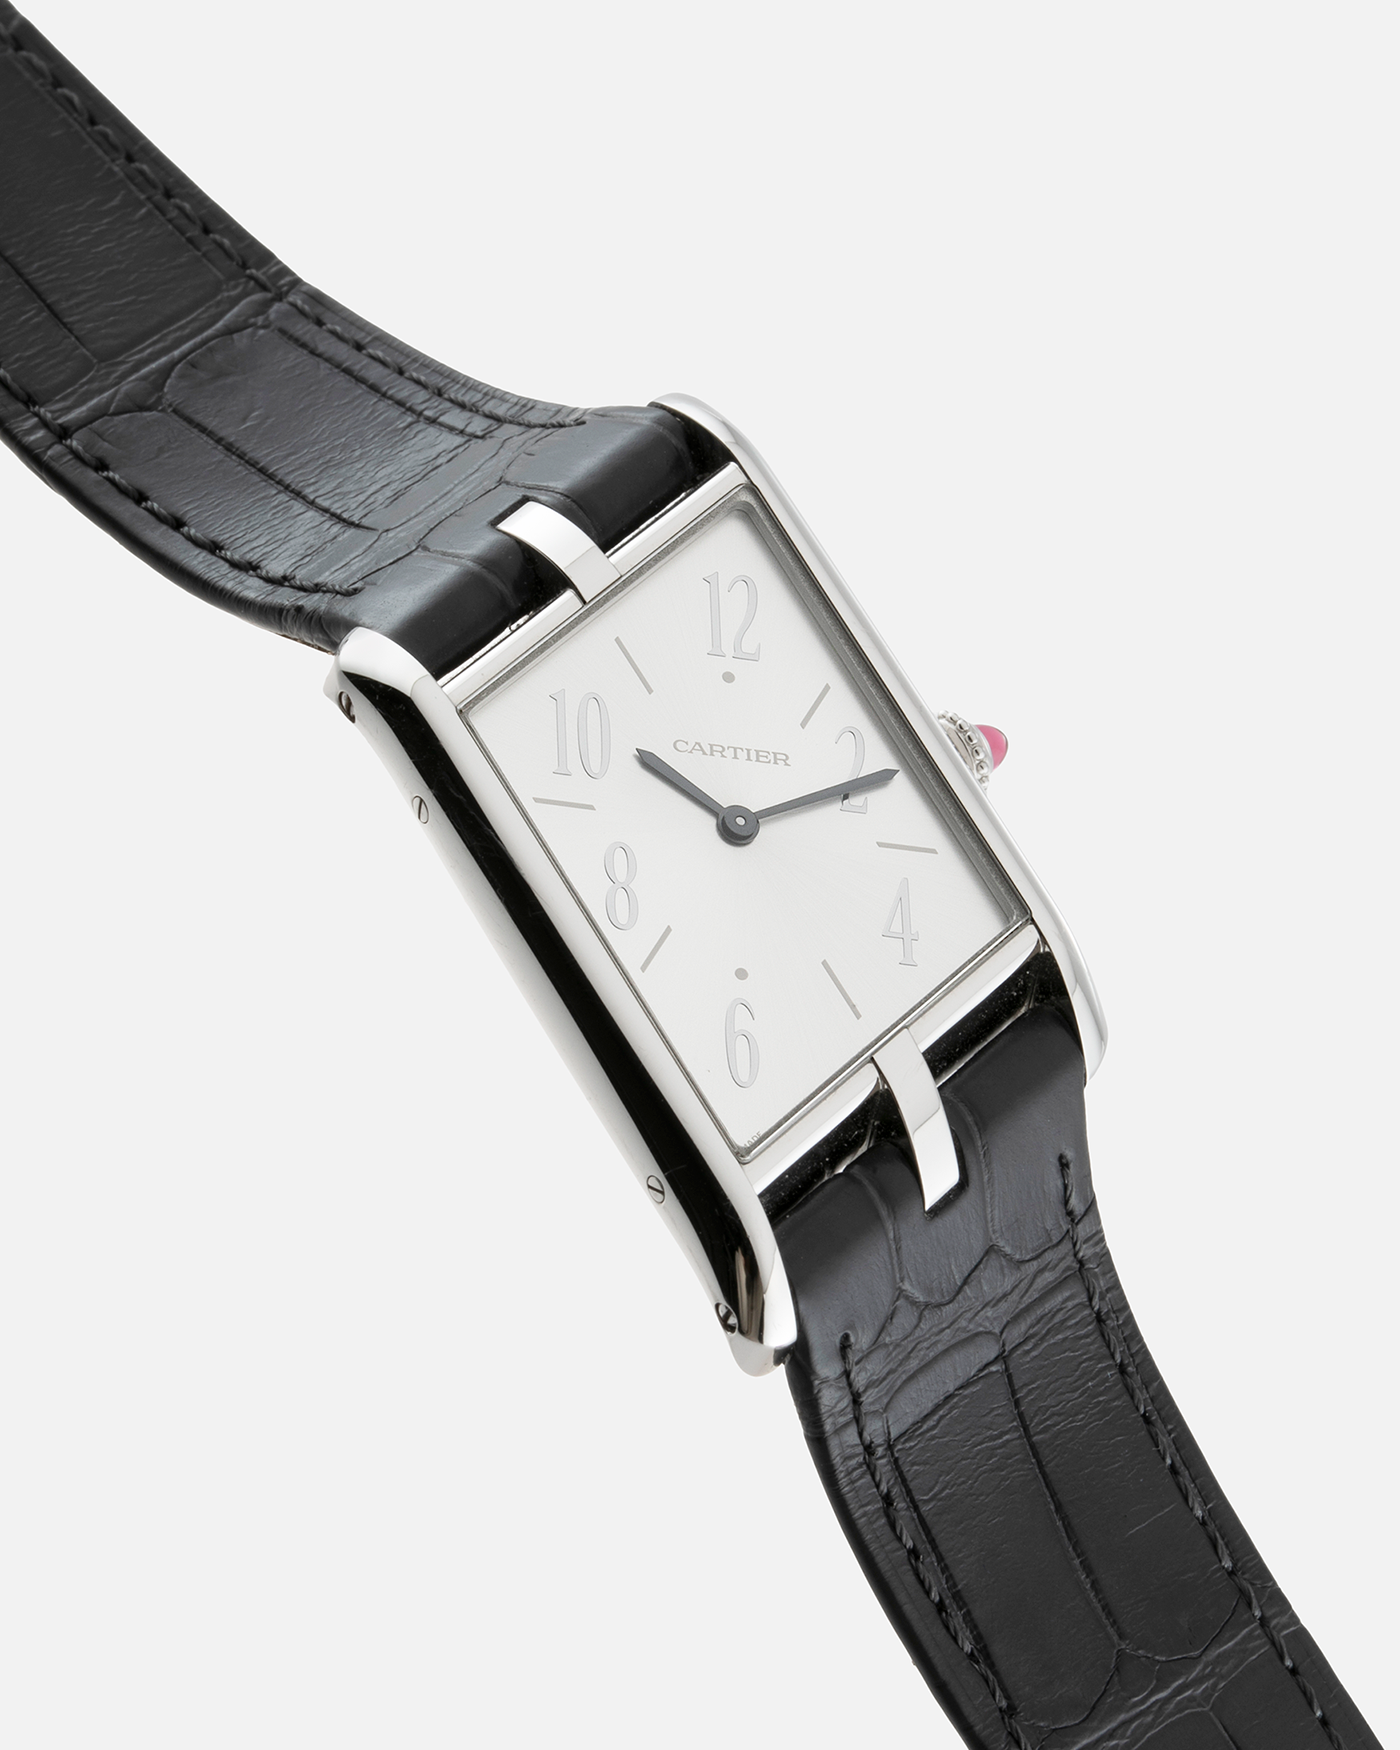 Brand: Cartier Year: 2020 Model: Privé Tank Asymétrique Platinum Reference: WGTA0042 Material: Platinum Movement: Cal. 1917MC, Manual-Winding Case Diameter: 47.15mm x 26.2mm x 6.38mm Strap: Cartier Grey Alligator Leather with Signed Tang Buckle  